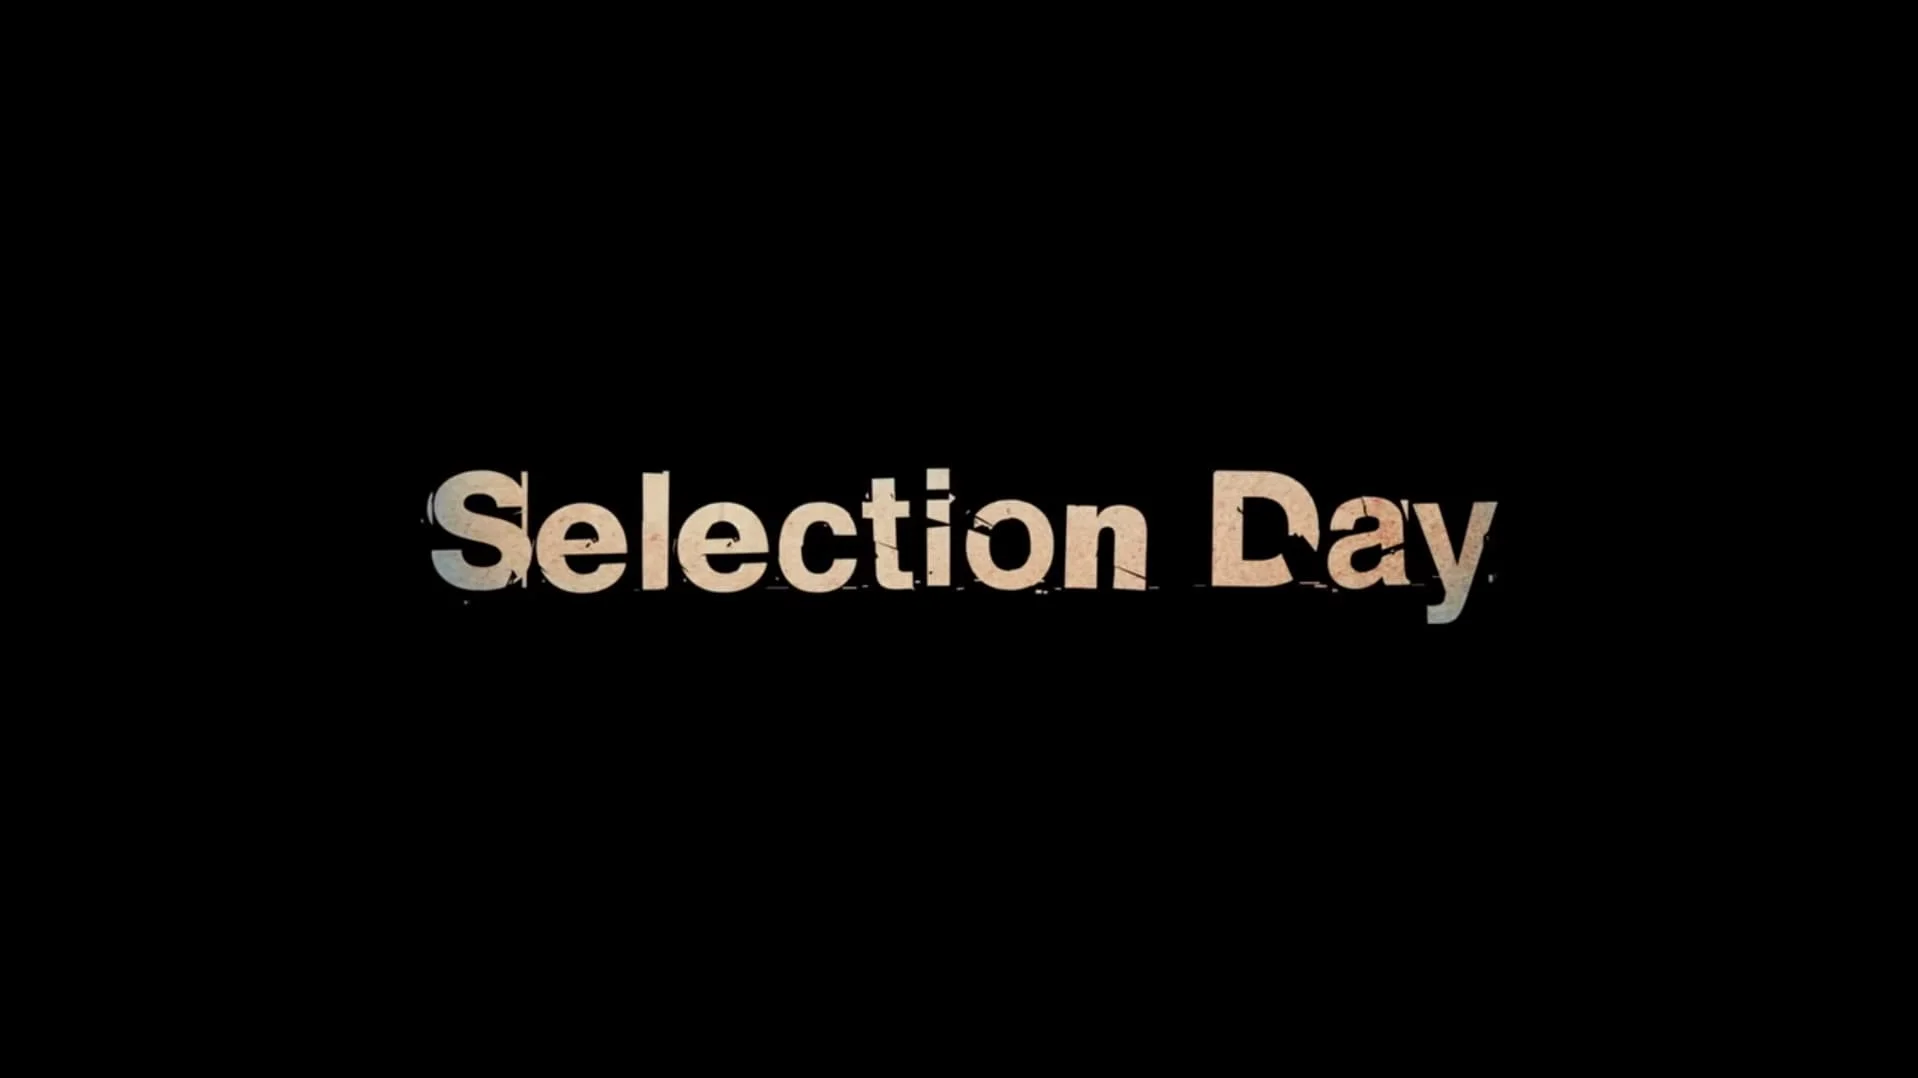 Netflix has released other six episodes of Selection Day Season 1